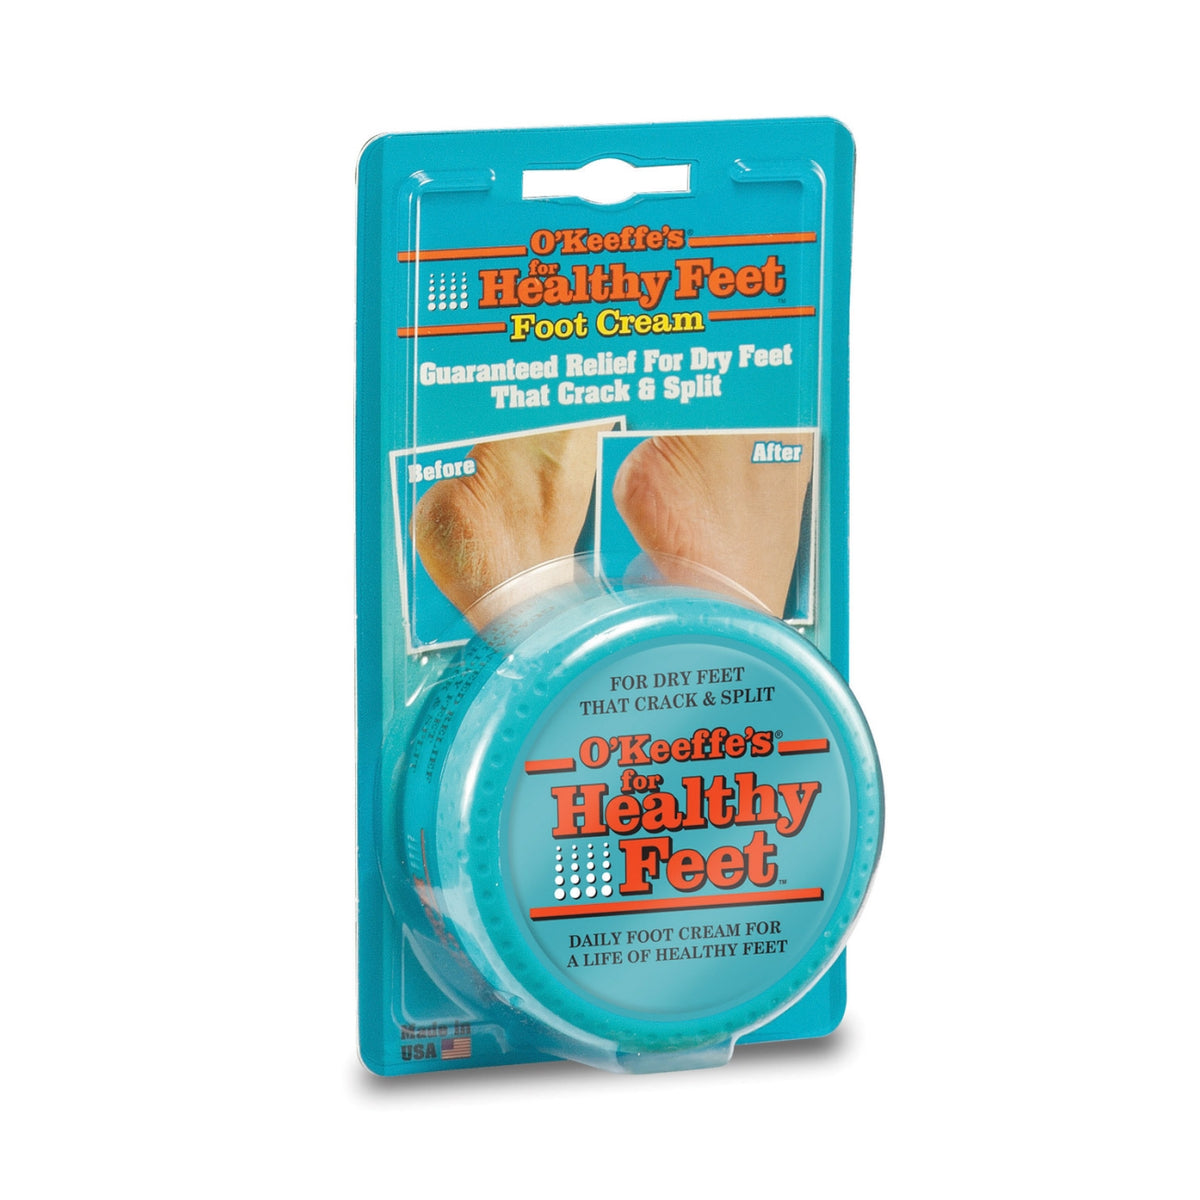 Buy working foot cream - Online store for personal care, foot cream lotions & gels in USA, on sale, low price, discount deals, coupon code